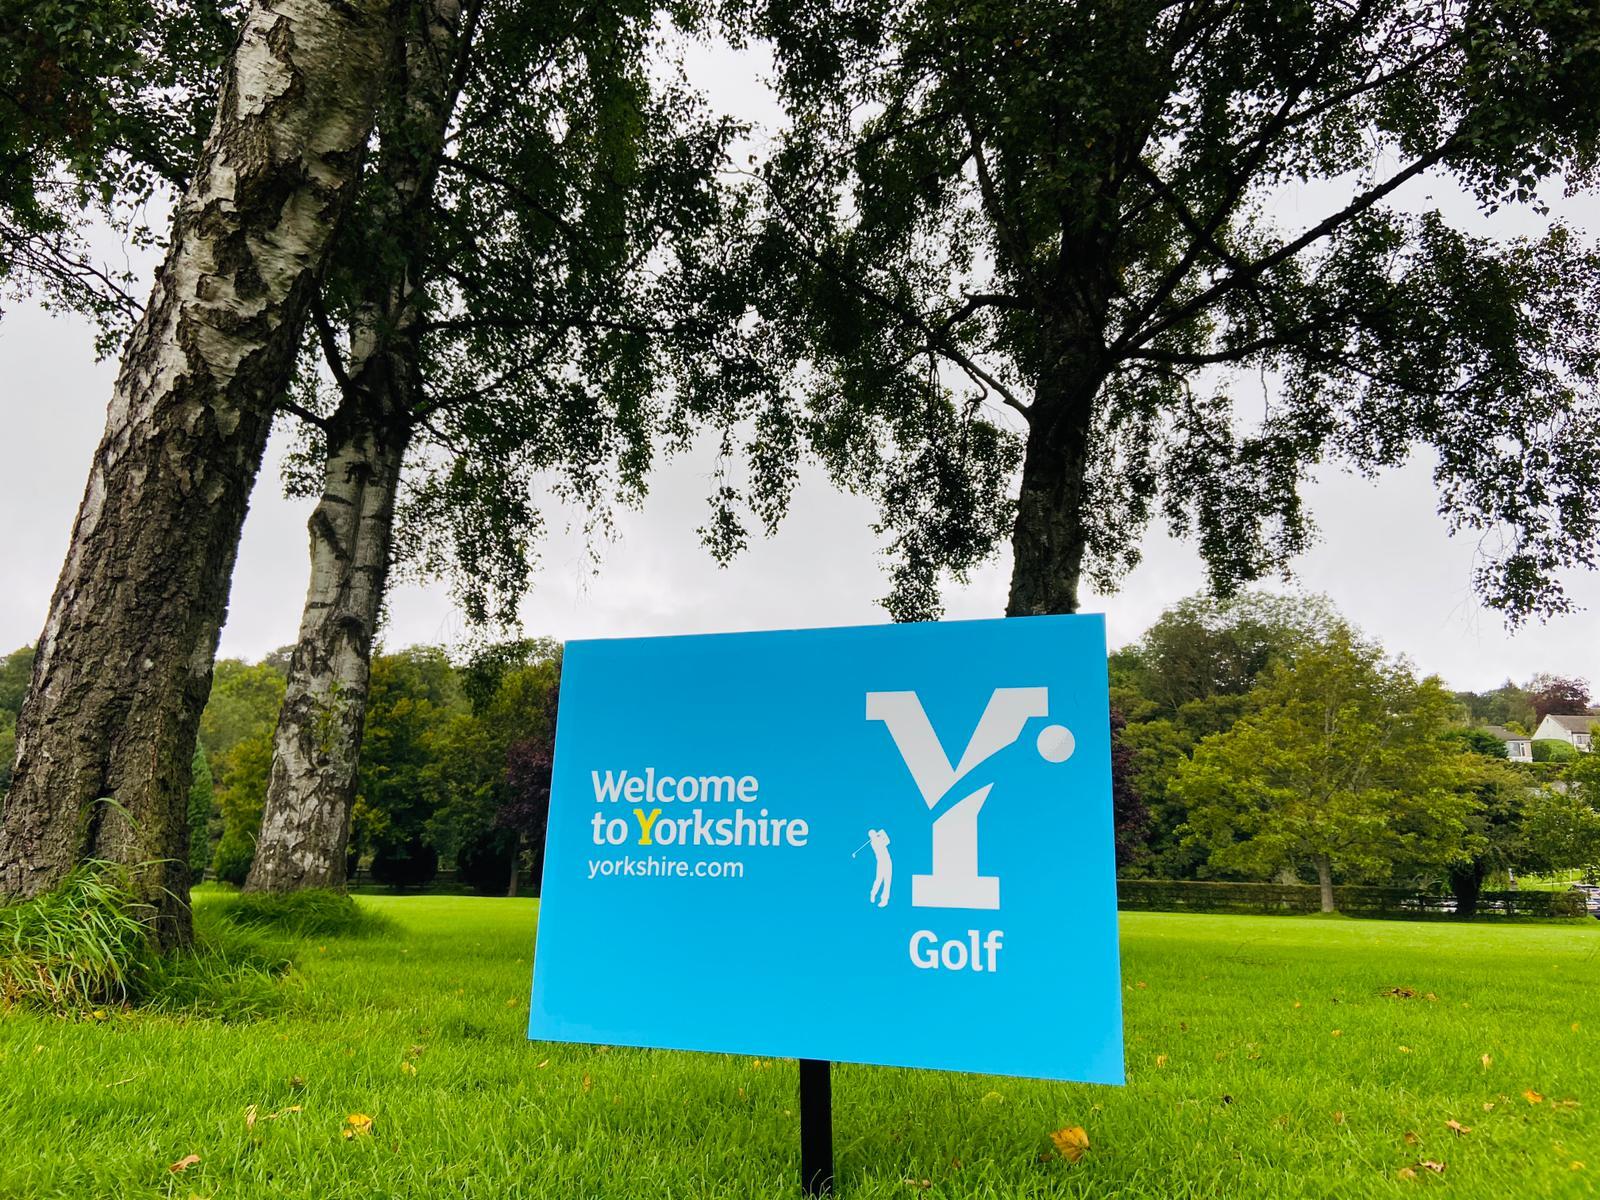 Welcome to Yorkshire golf launch